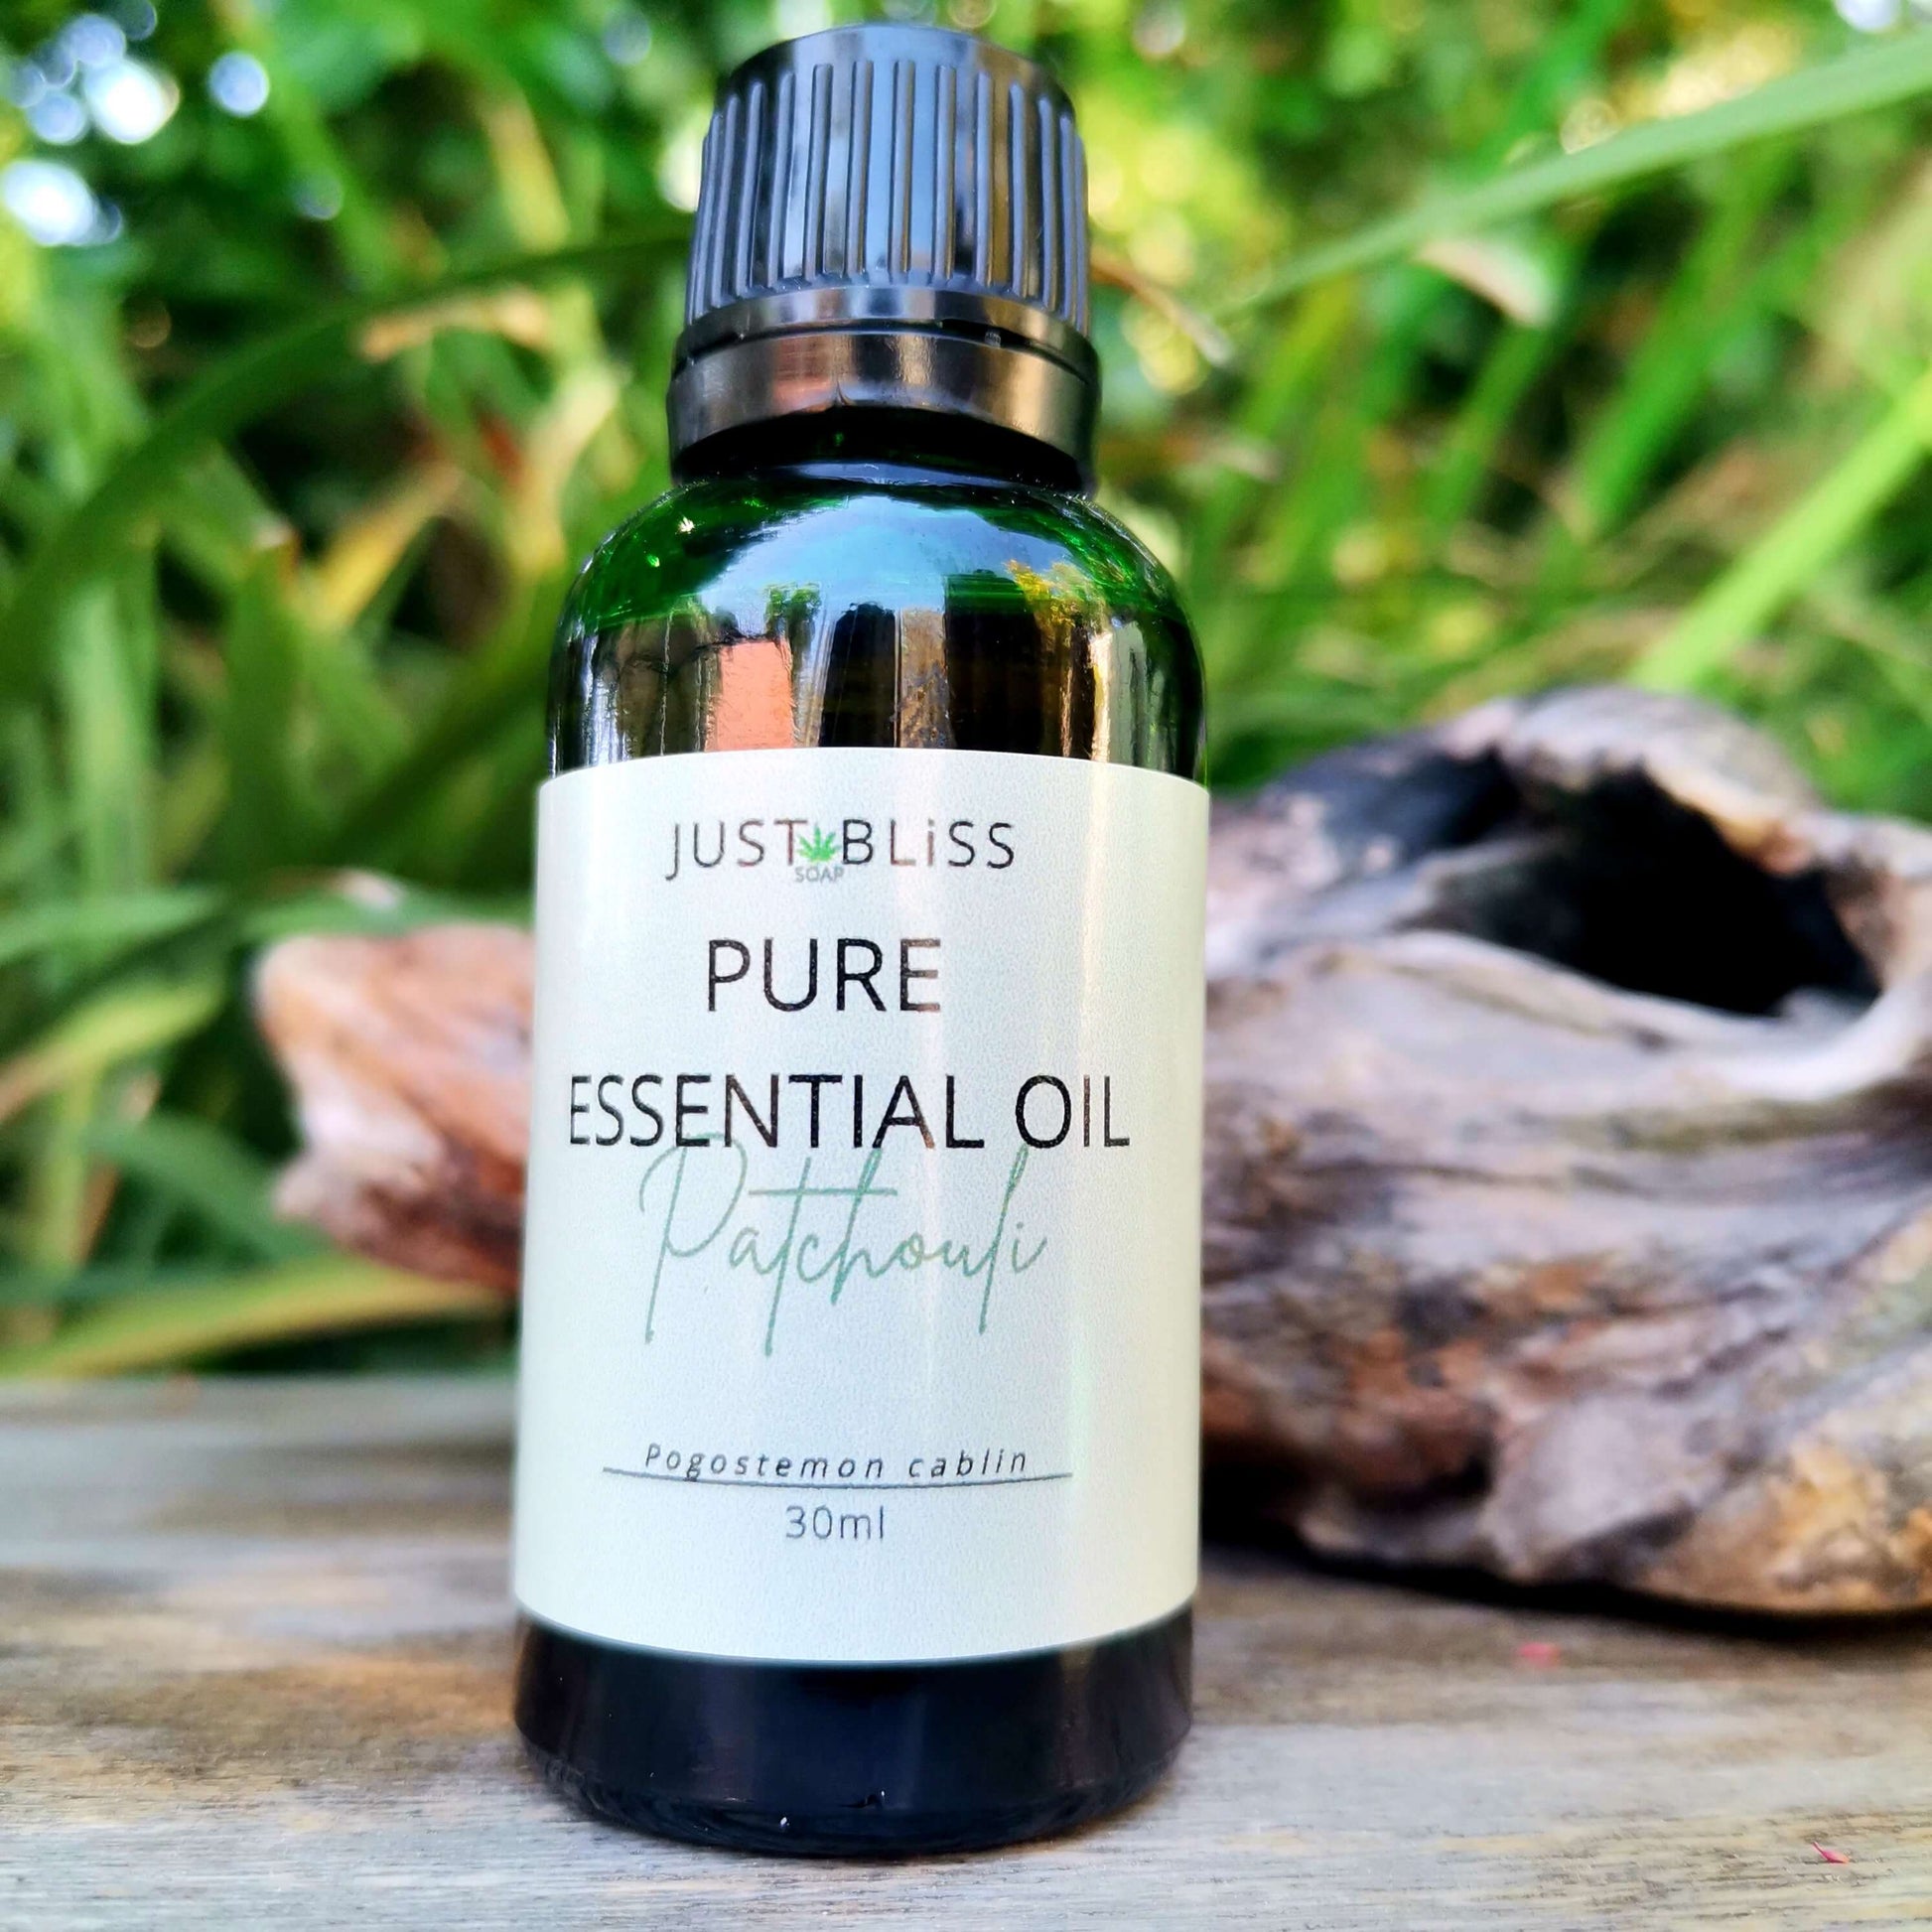 JUSTBLISS: ESSENTIAL OIL: Patchouli (Organic)